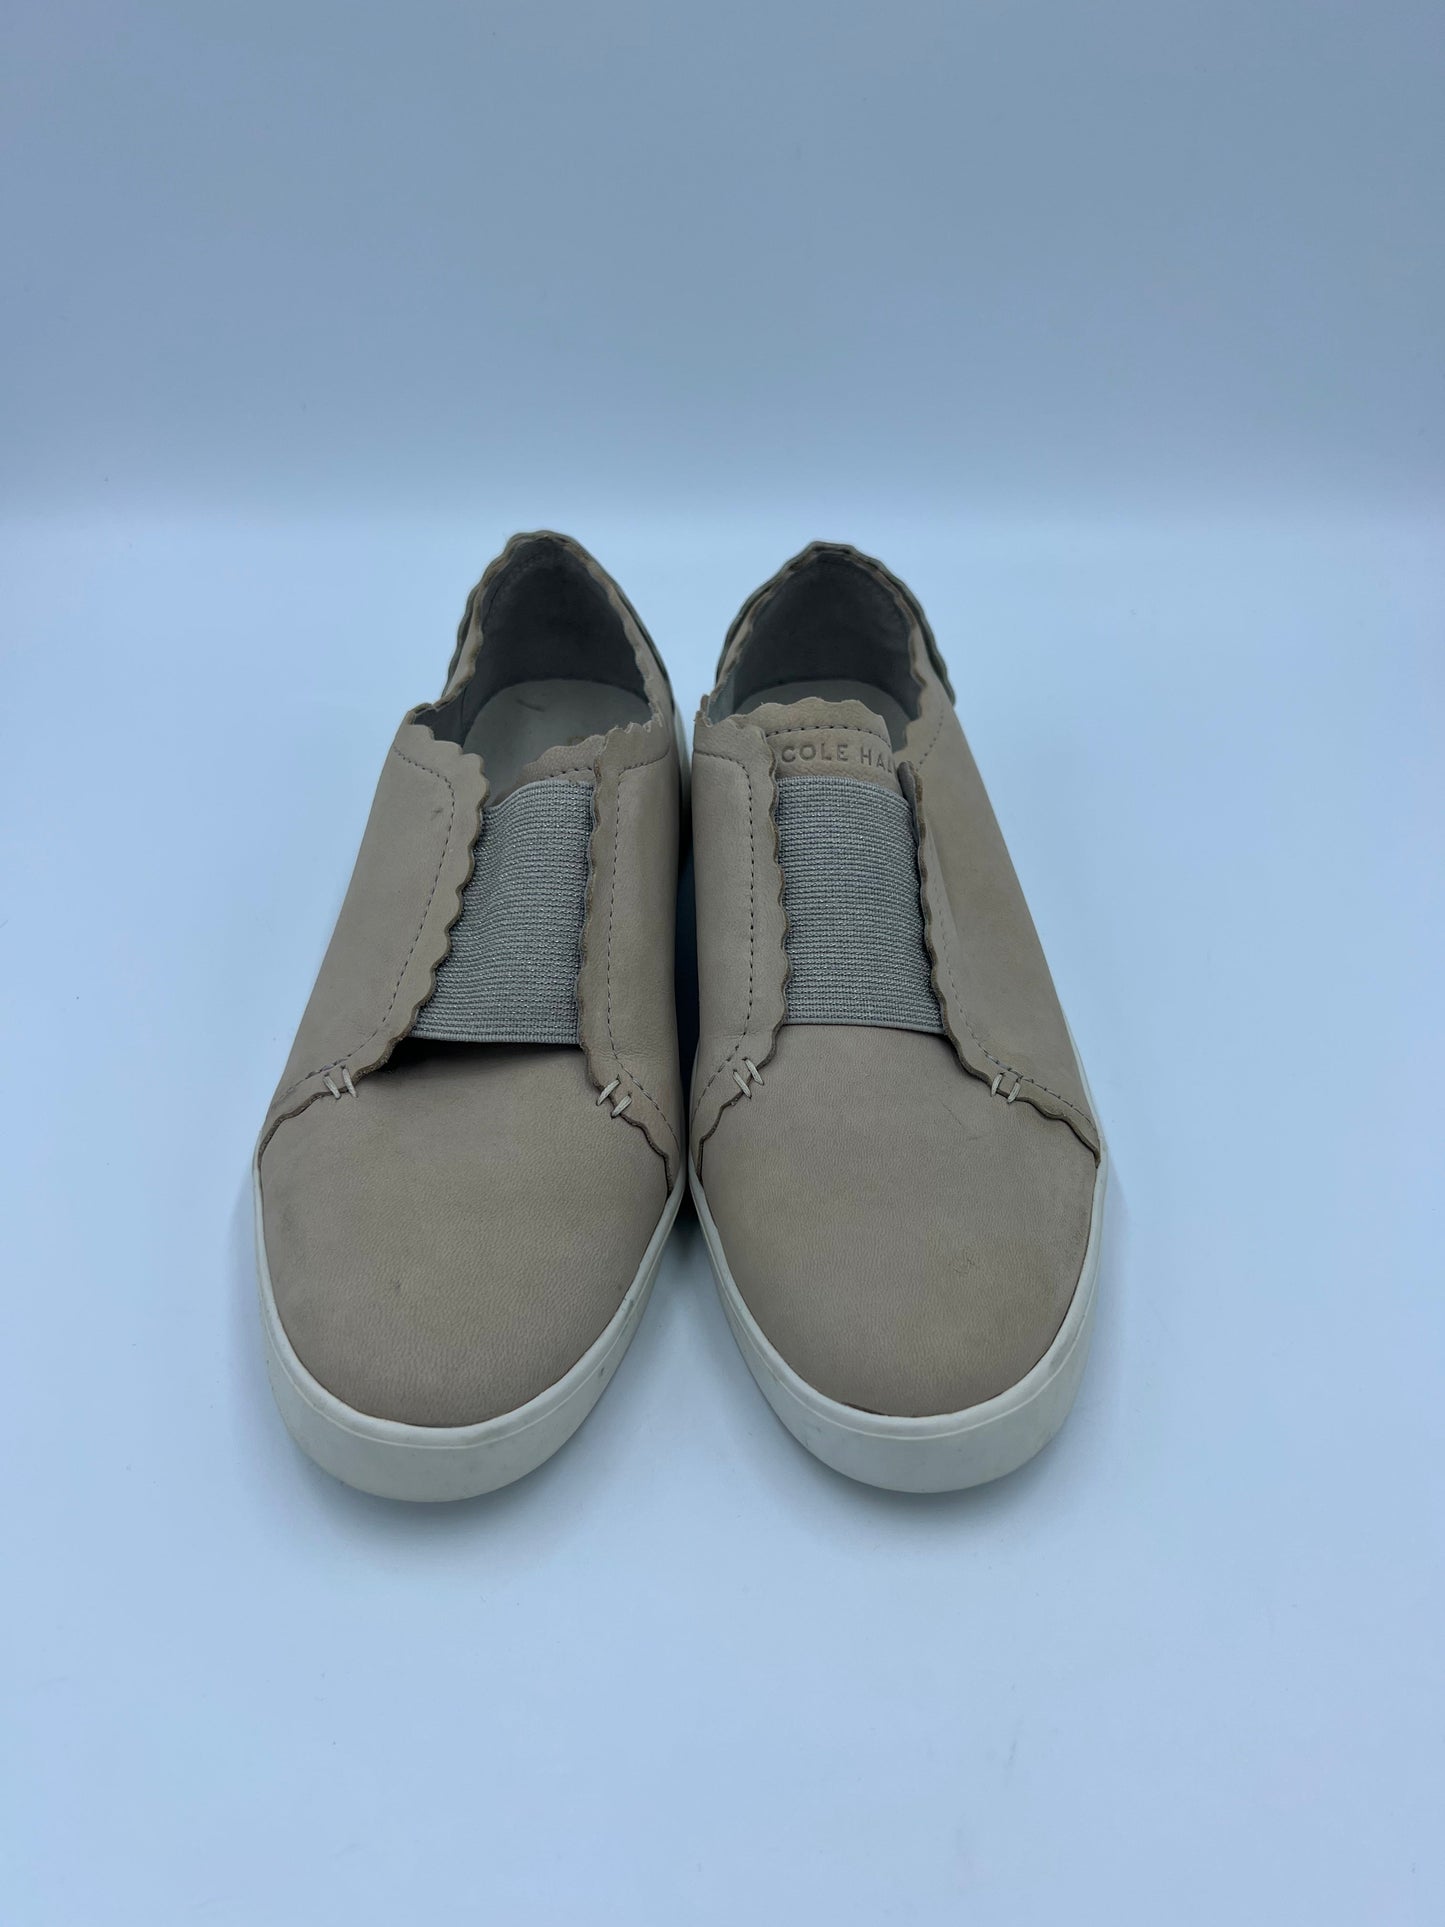 Shoes Designer By Cole-Haan  Size: 8